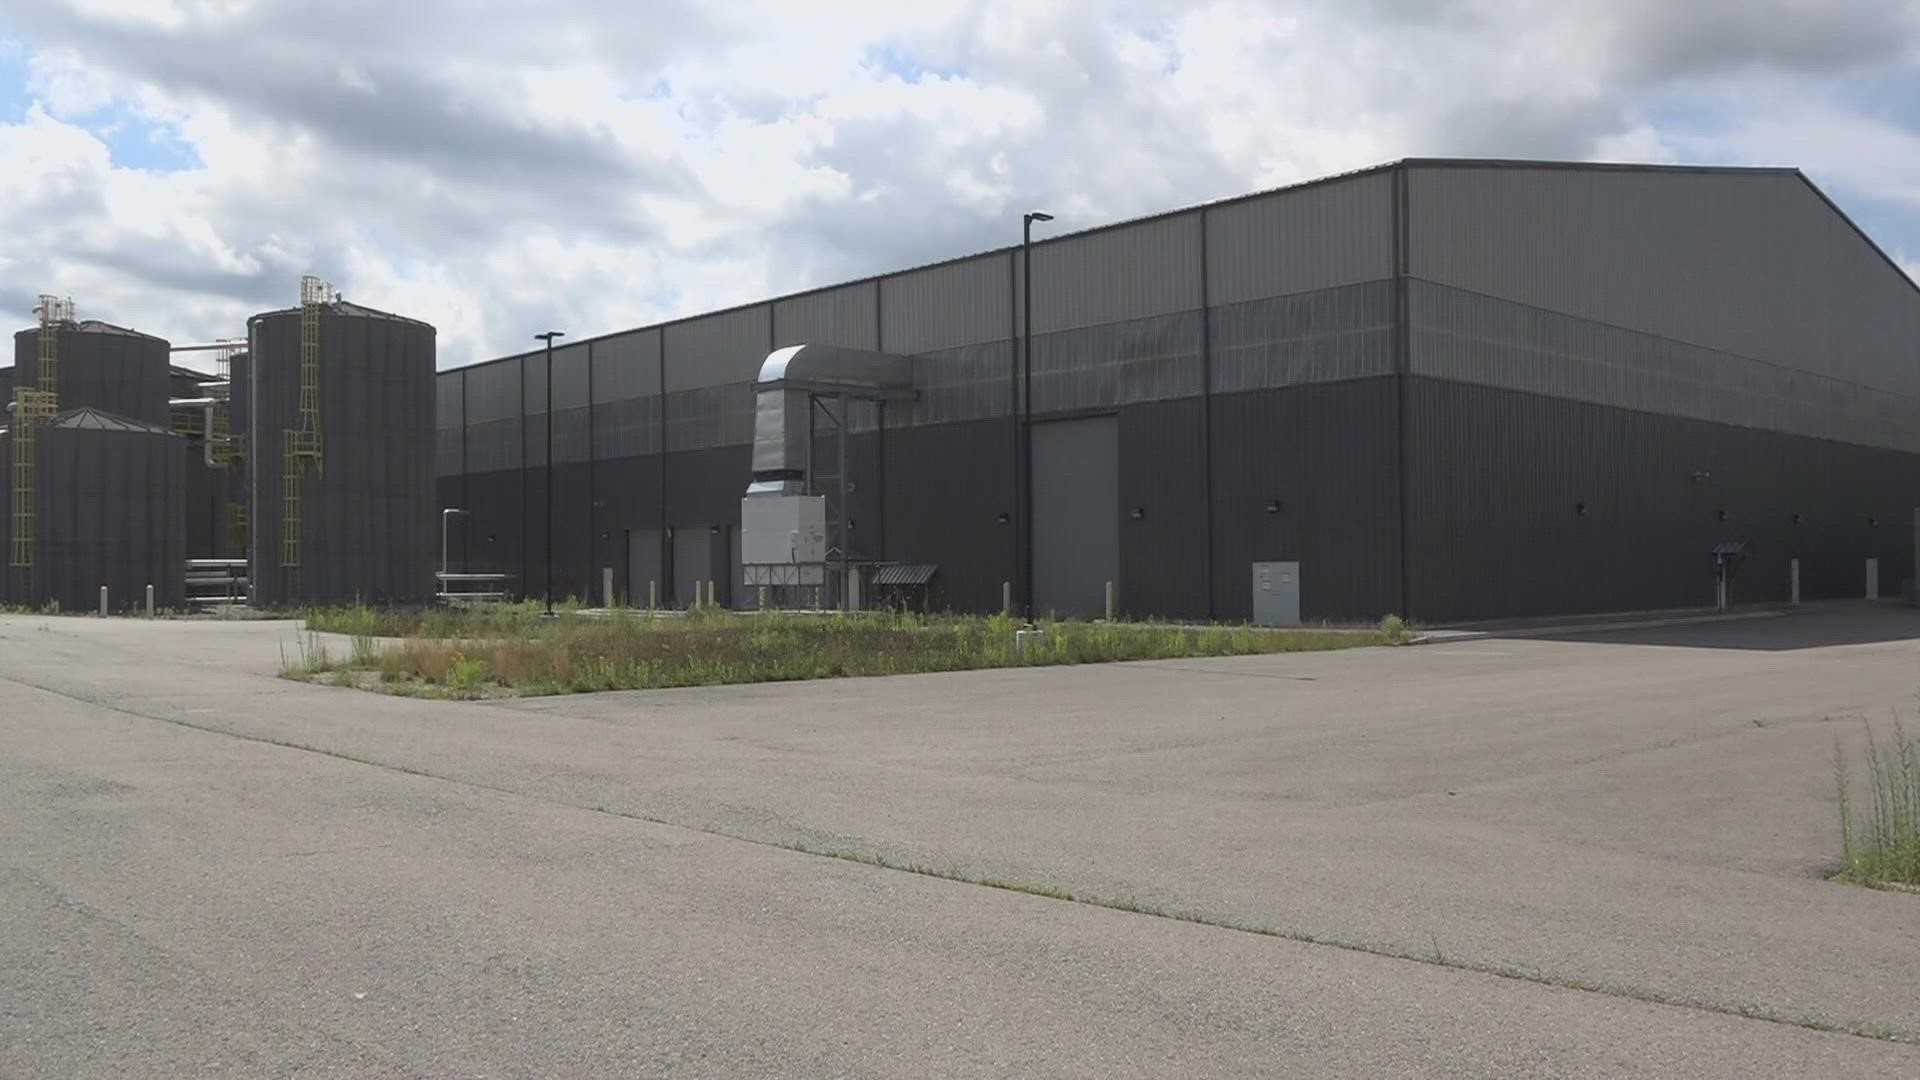 The purchase of the advanced municipal waste facility in Hampden was approved Friday, and closing procedures are expected to finalize next week, a release says.